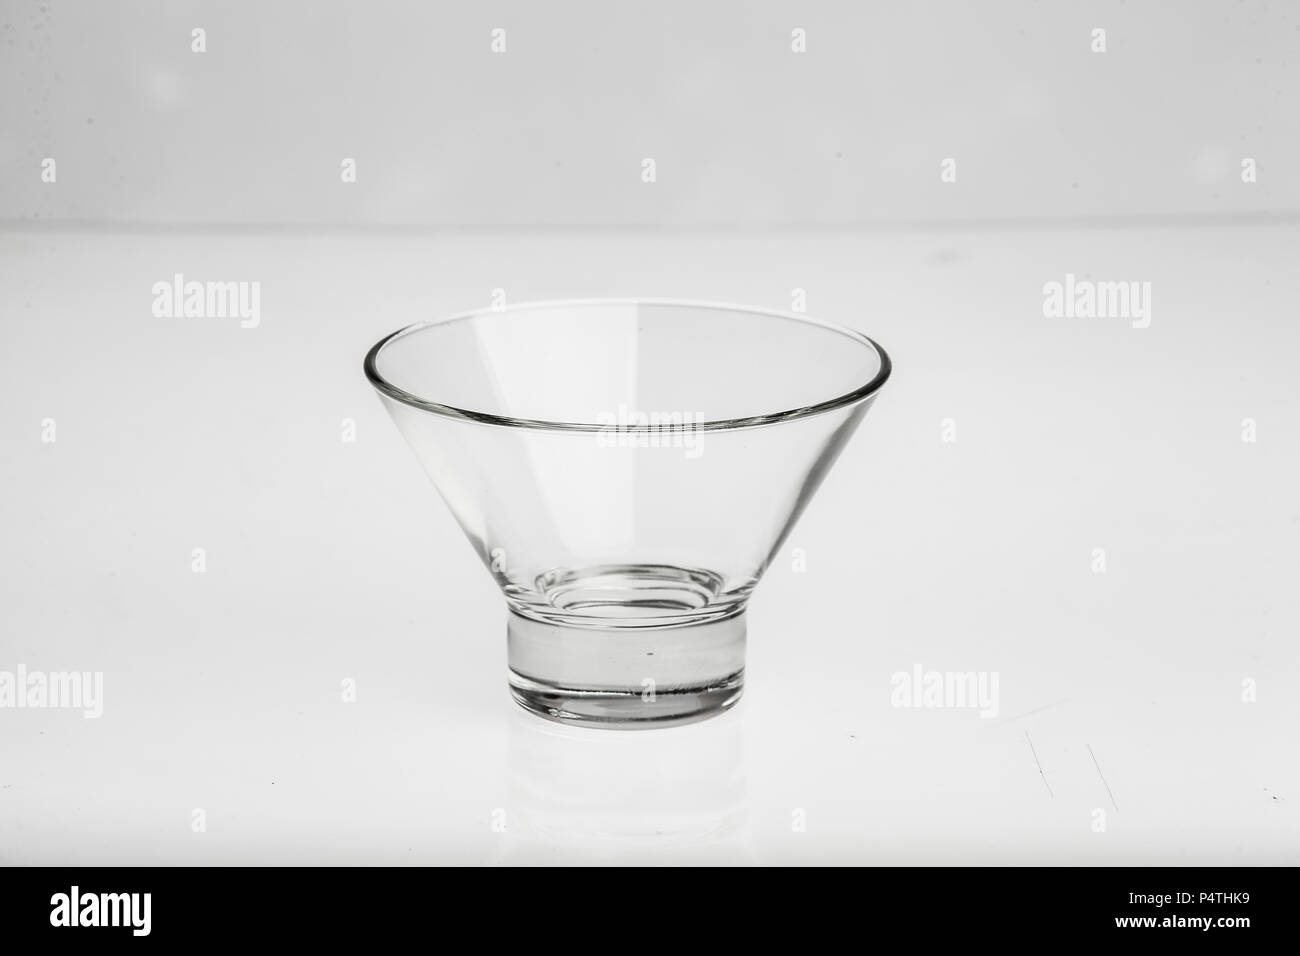 Different glass objects, vases, plates for sauces etc Stock Photo